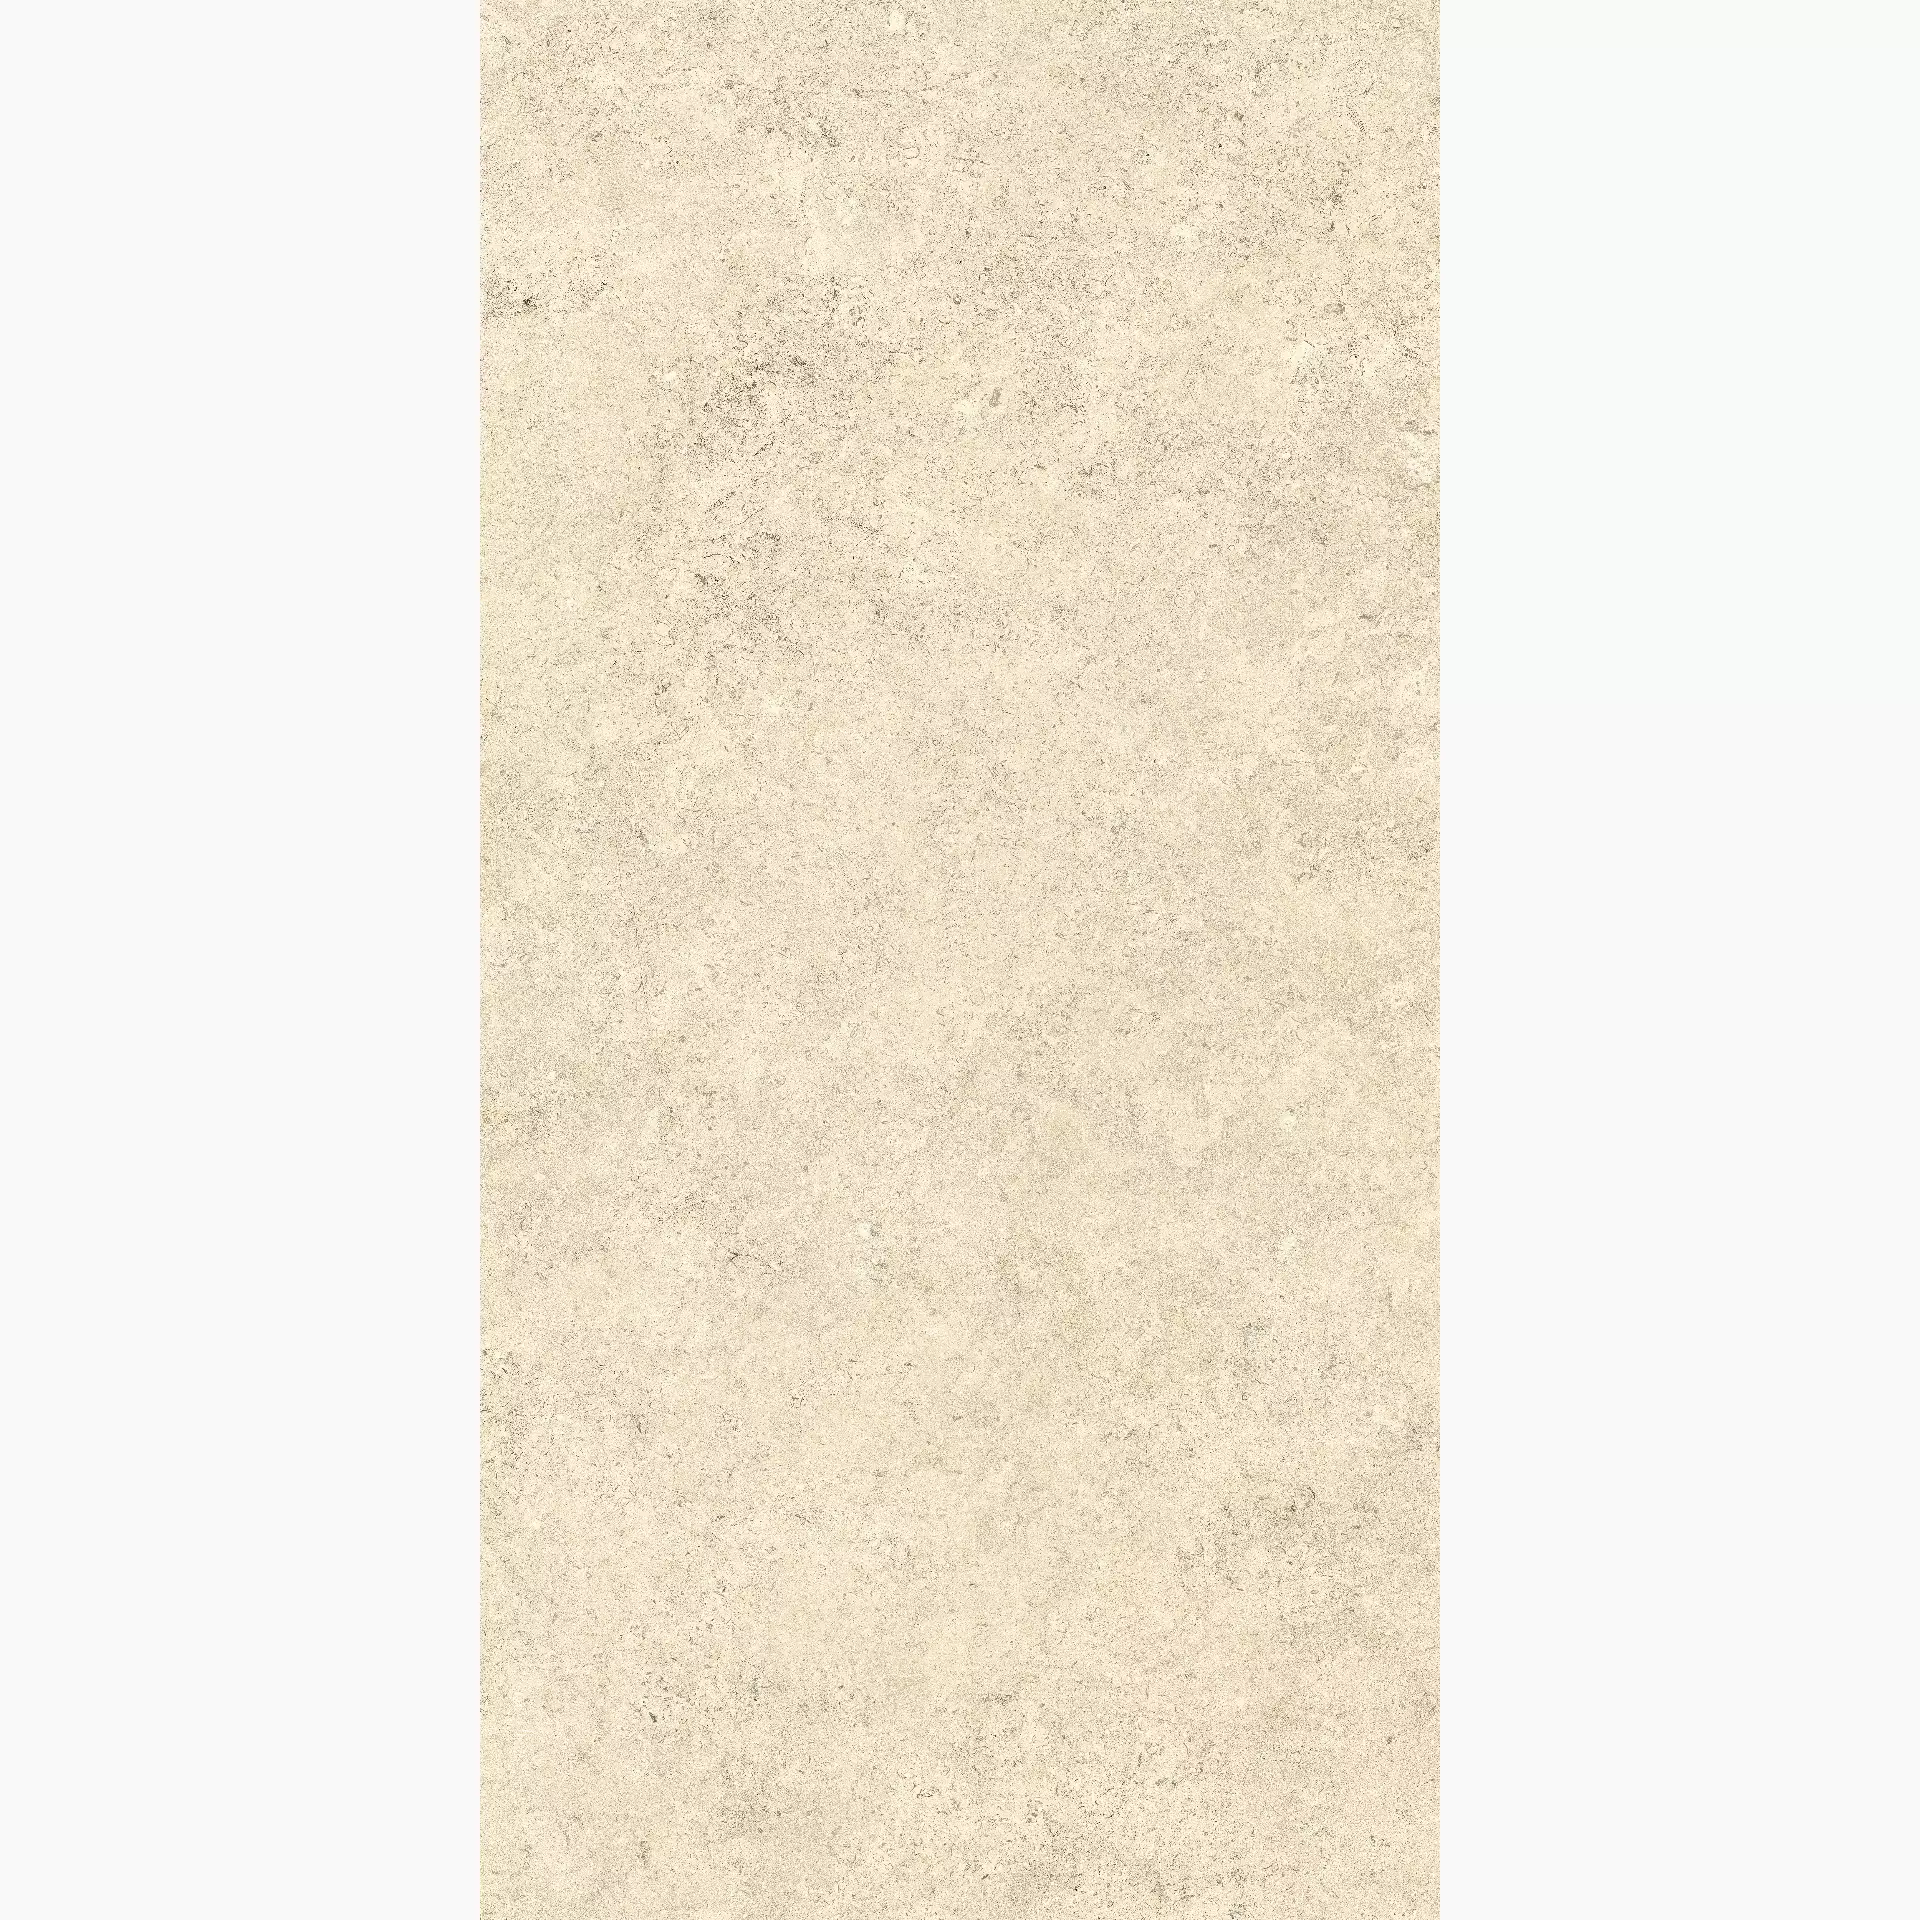 Cottodeste Pura Ivory Hammered Protect EGXPR60 60x120cm rectified 20mm